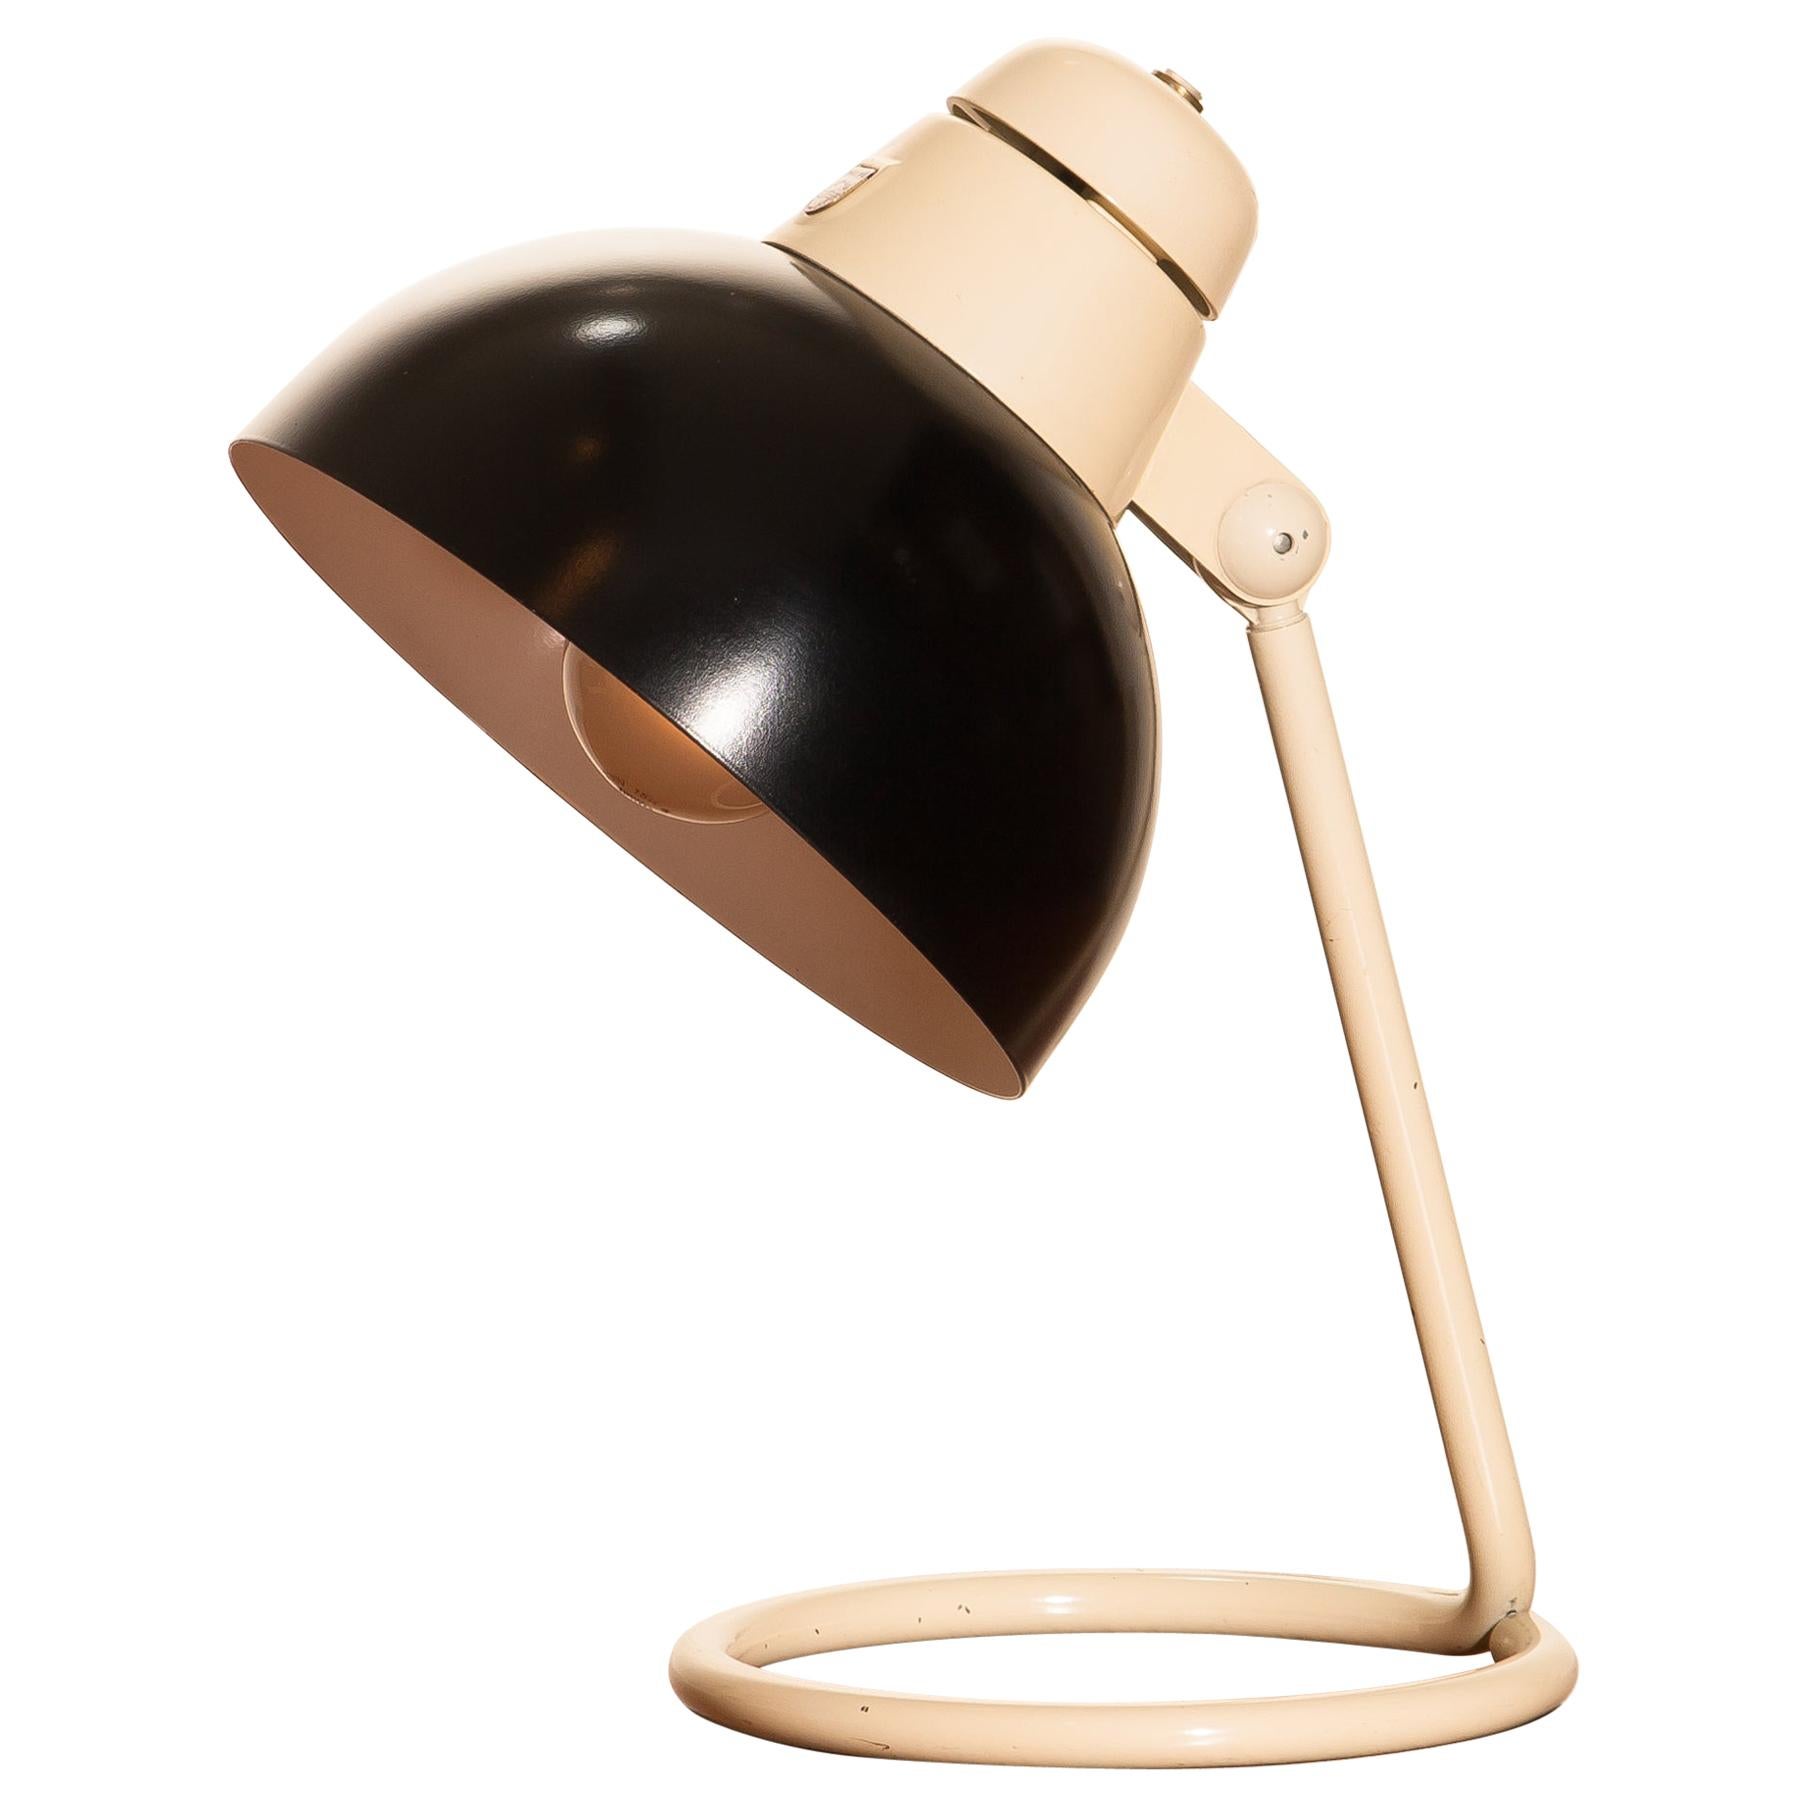 Beautiful desk or table lamp in off-white and black lacquered metal and in very nice condition produced by Philips.
Labelled.
Period: 1950
The dimensions are height 33 cm, 13 inch, diameter shade 20 cm, 8 inch.